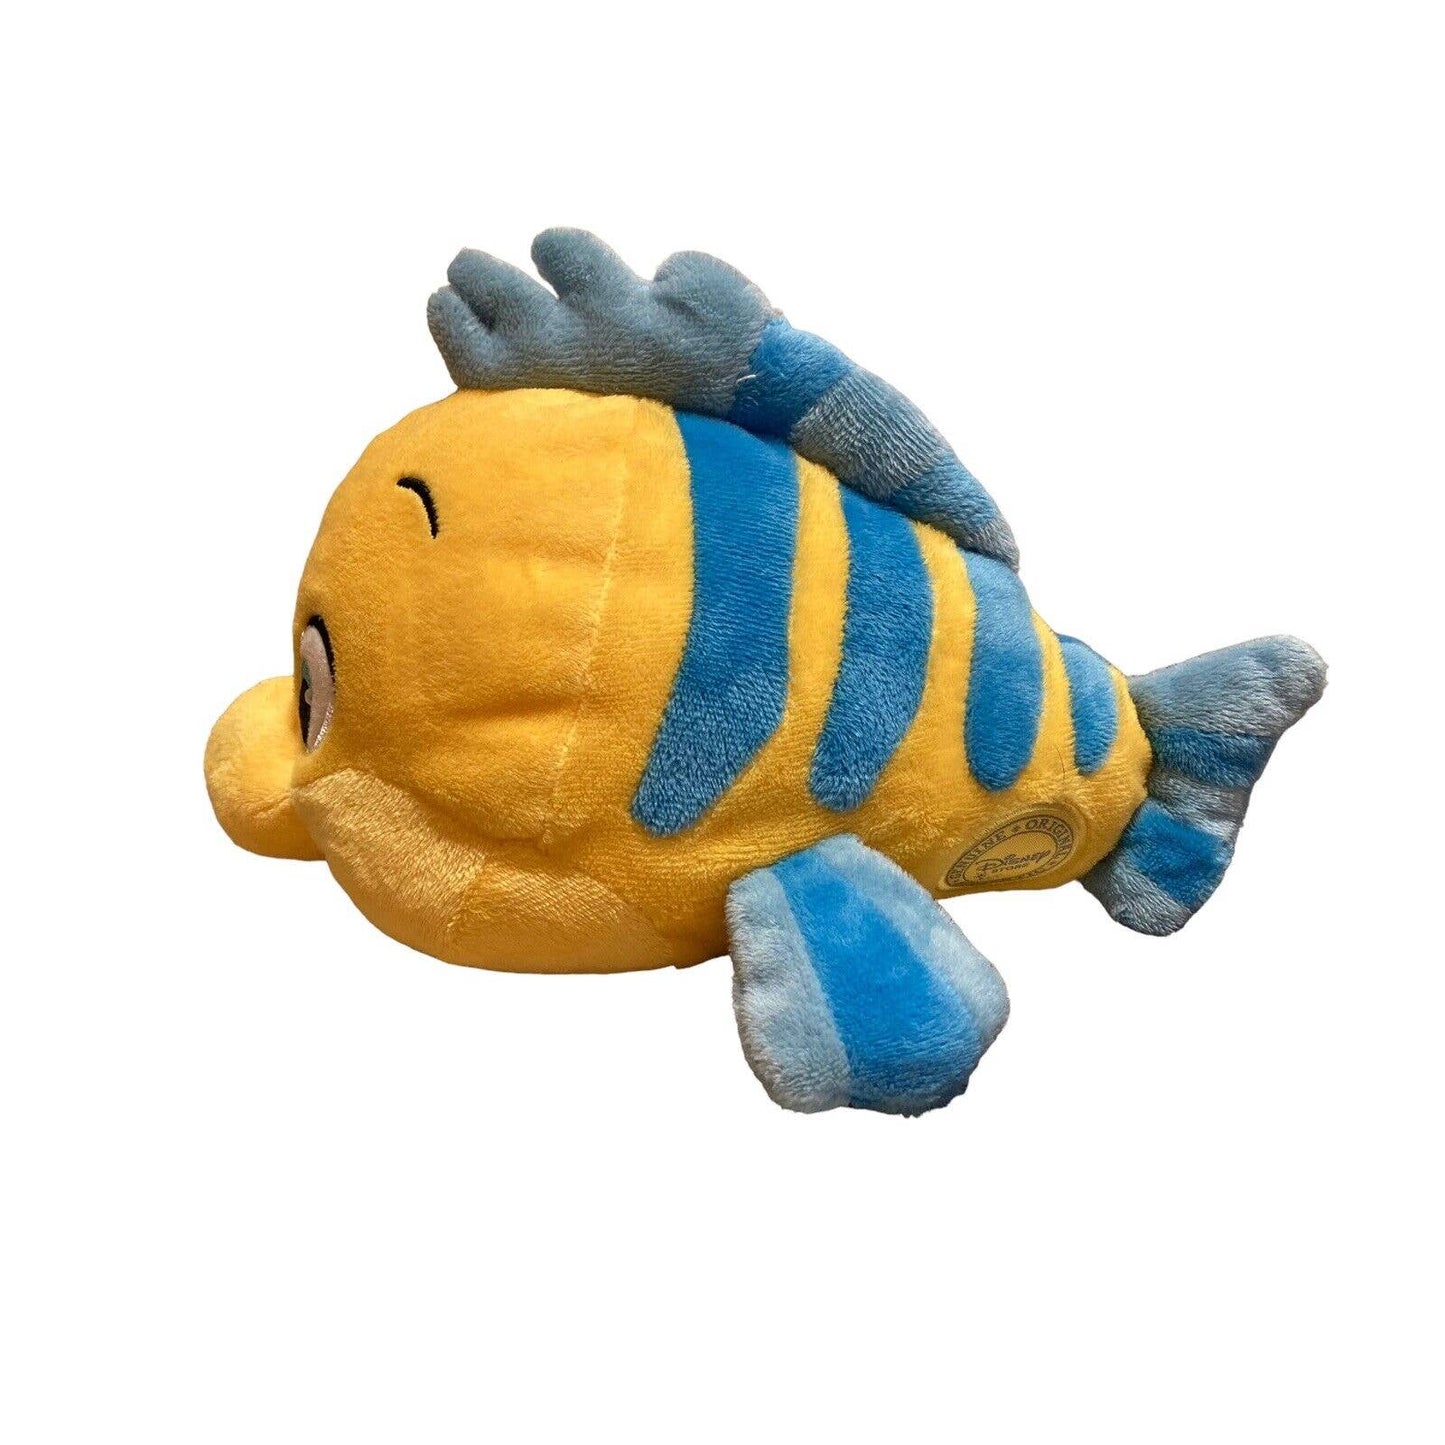 The Disney Store The Little Mermaid Flounder 11” Stuffed Plush Toy Authentic